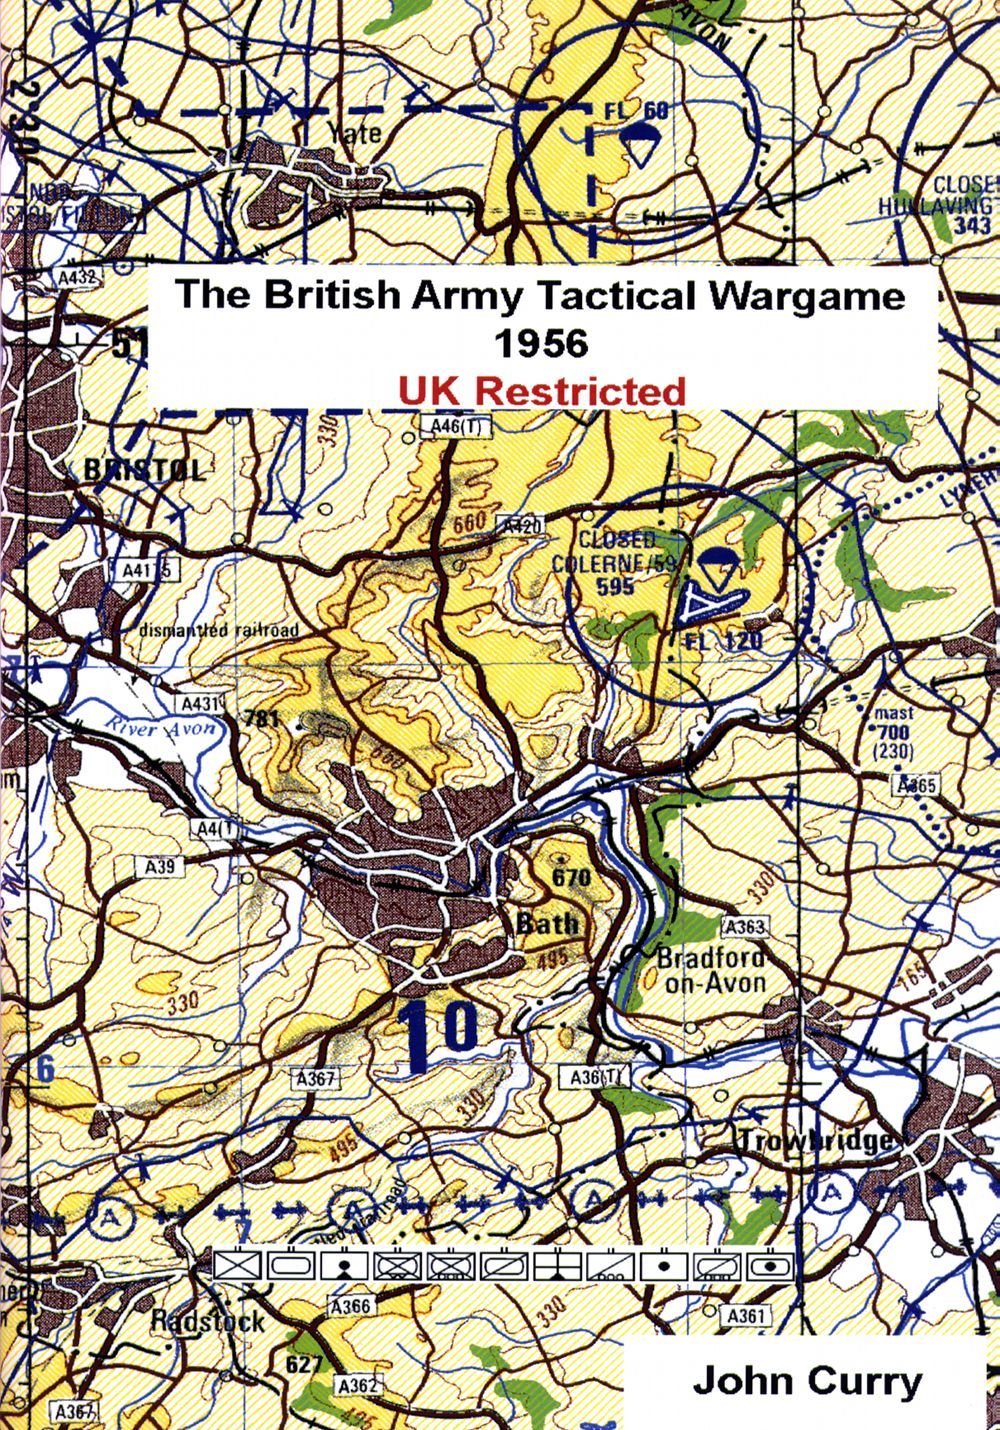 The British Army Tactical Wargame (1956)